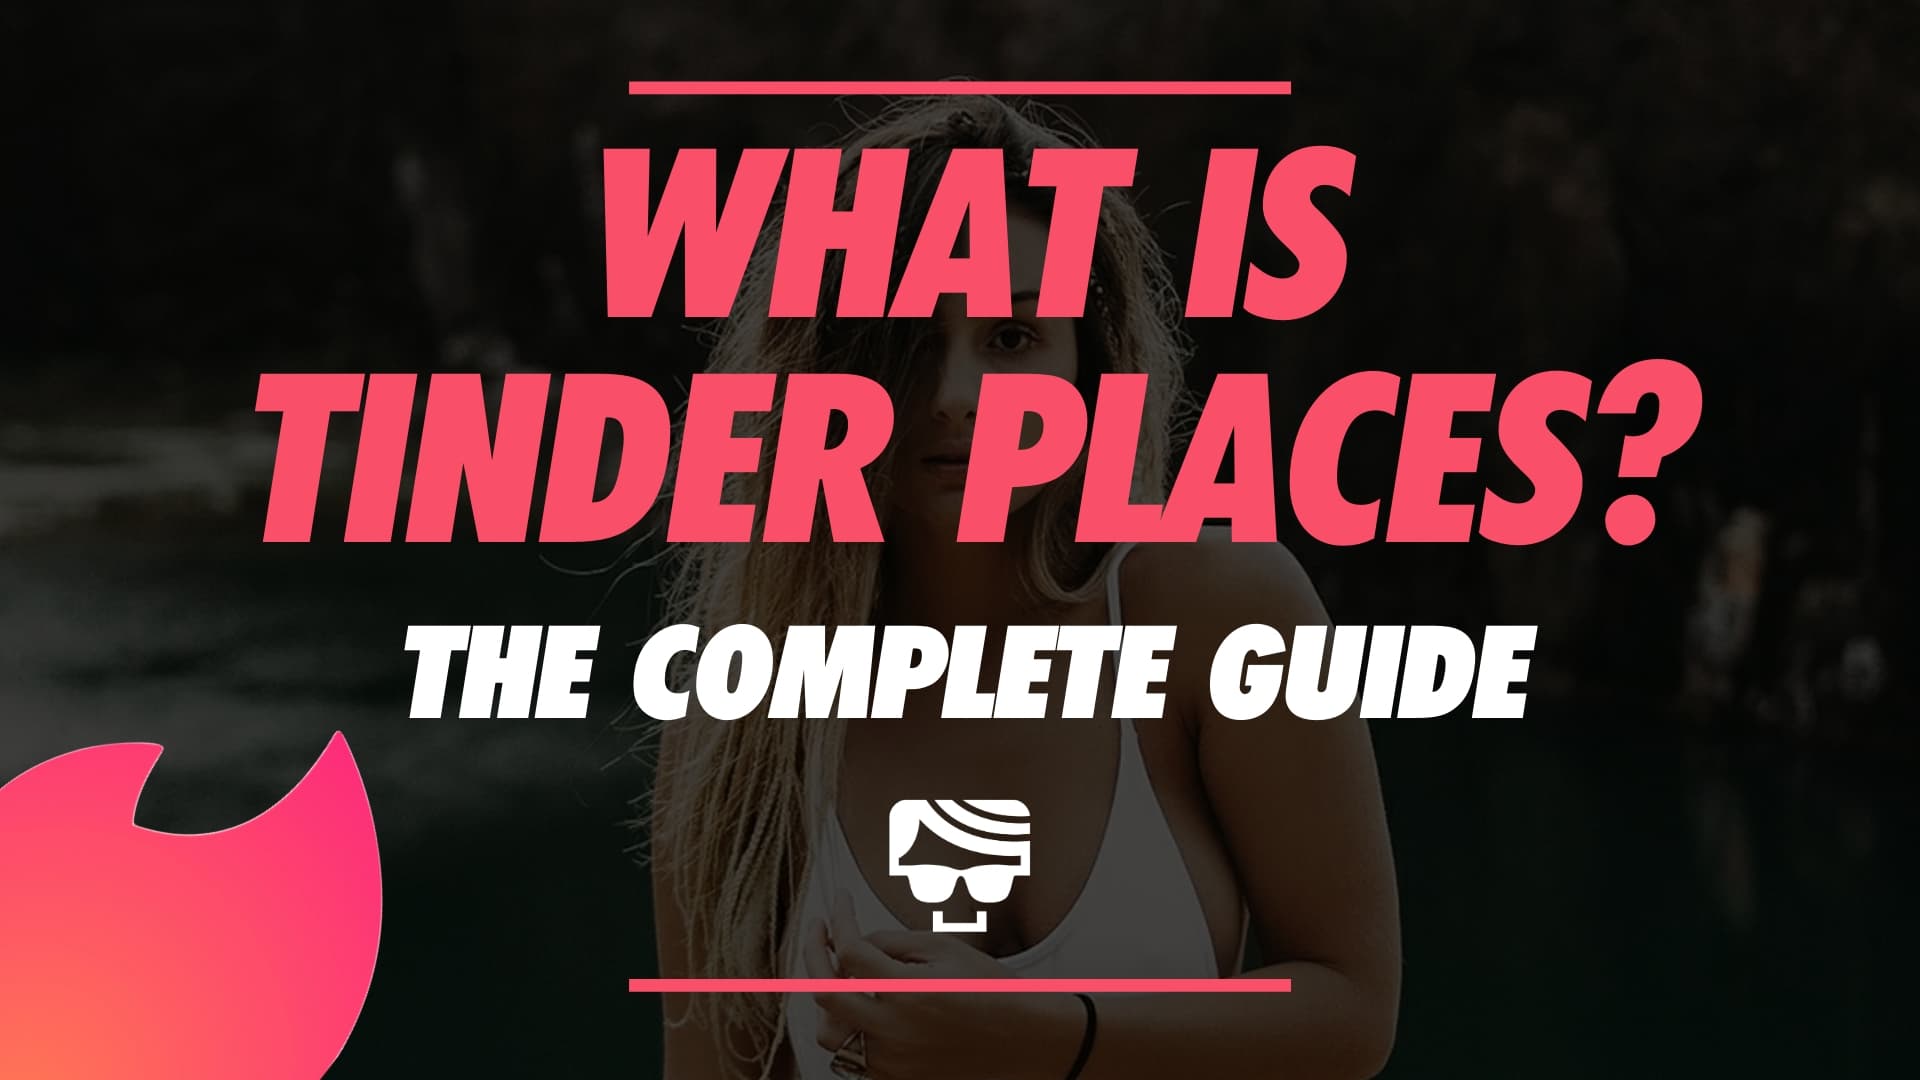 What Is Tinder Places?